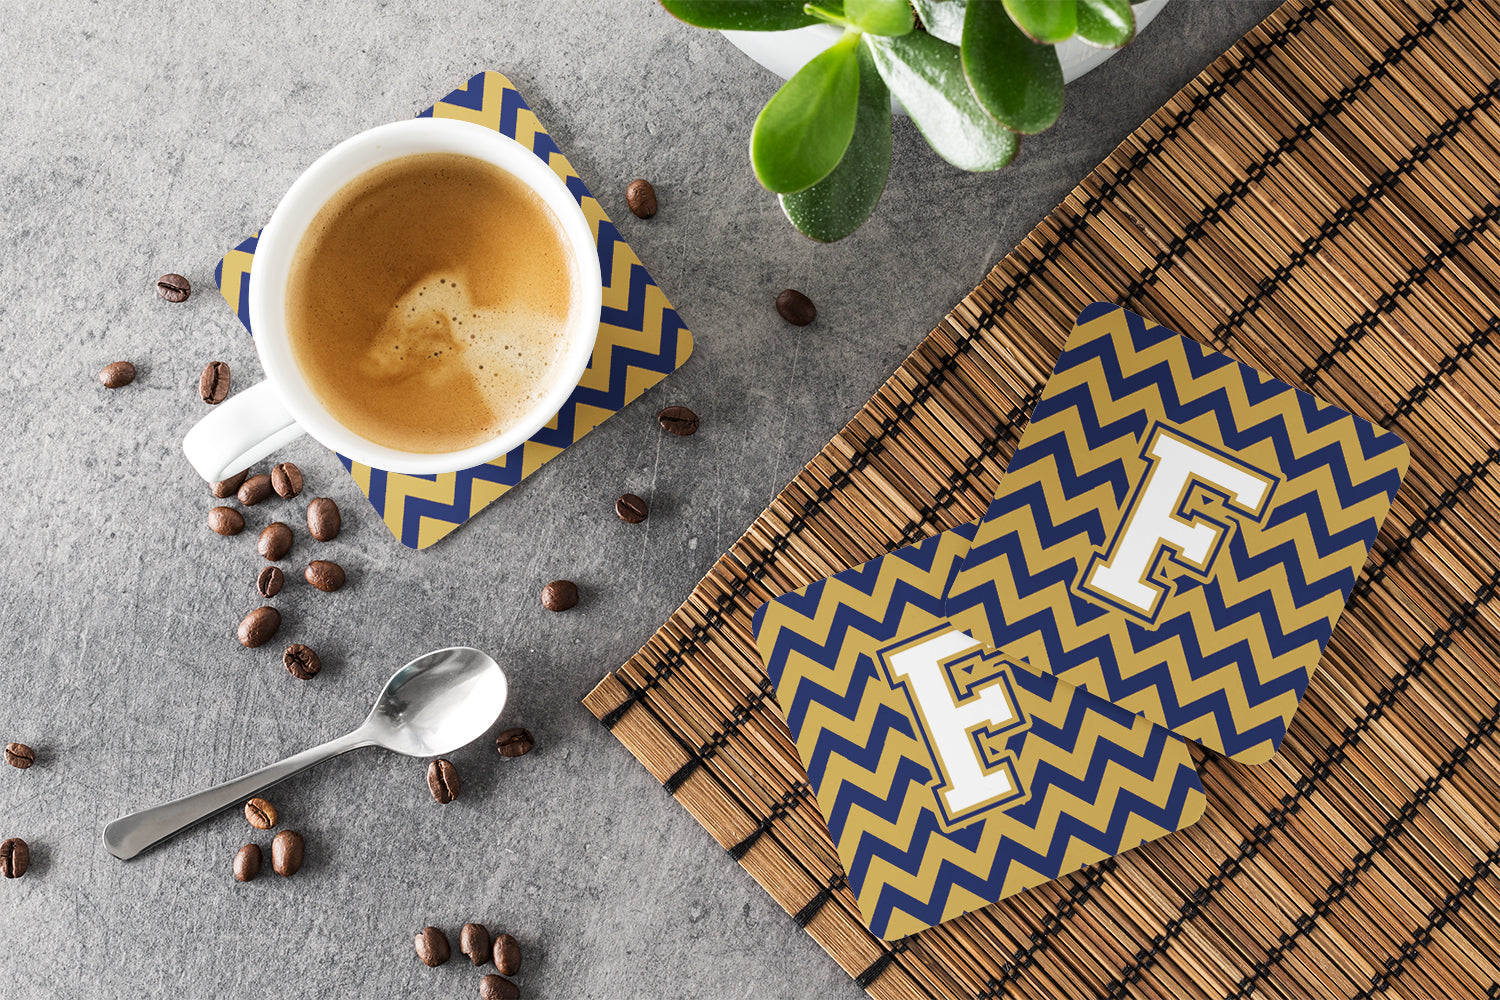 Set of 4 Letter F Chevron Navy Blue and Gold Foam Coasters Set of 4 CJ1057-FFC - the-store.com